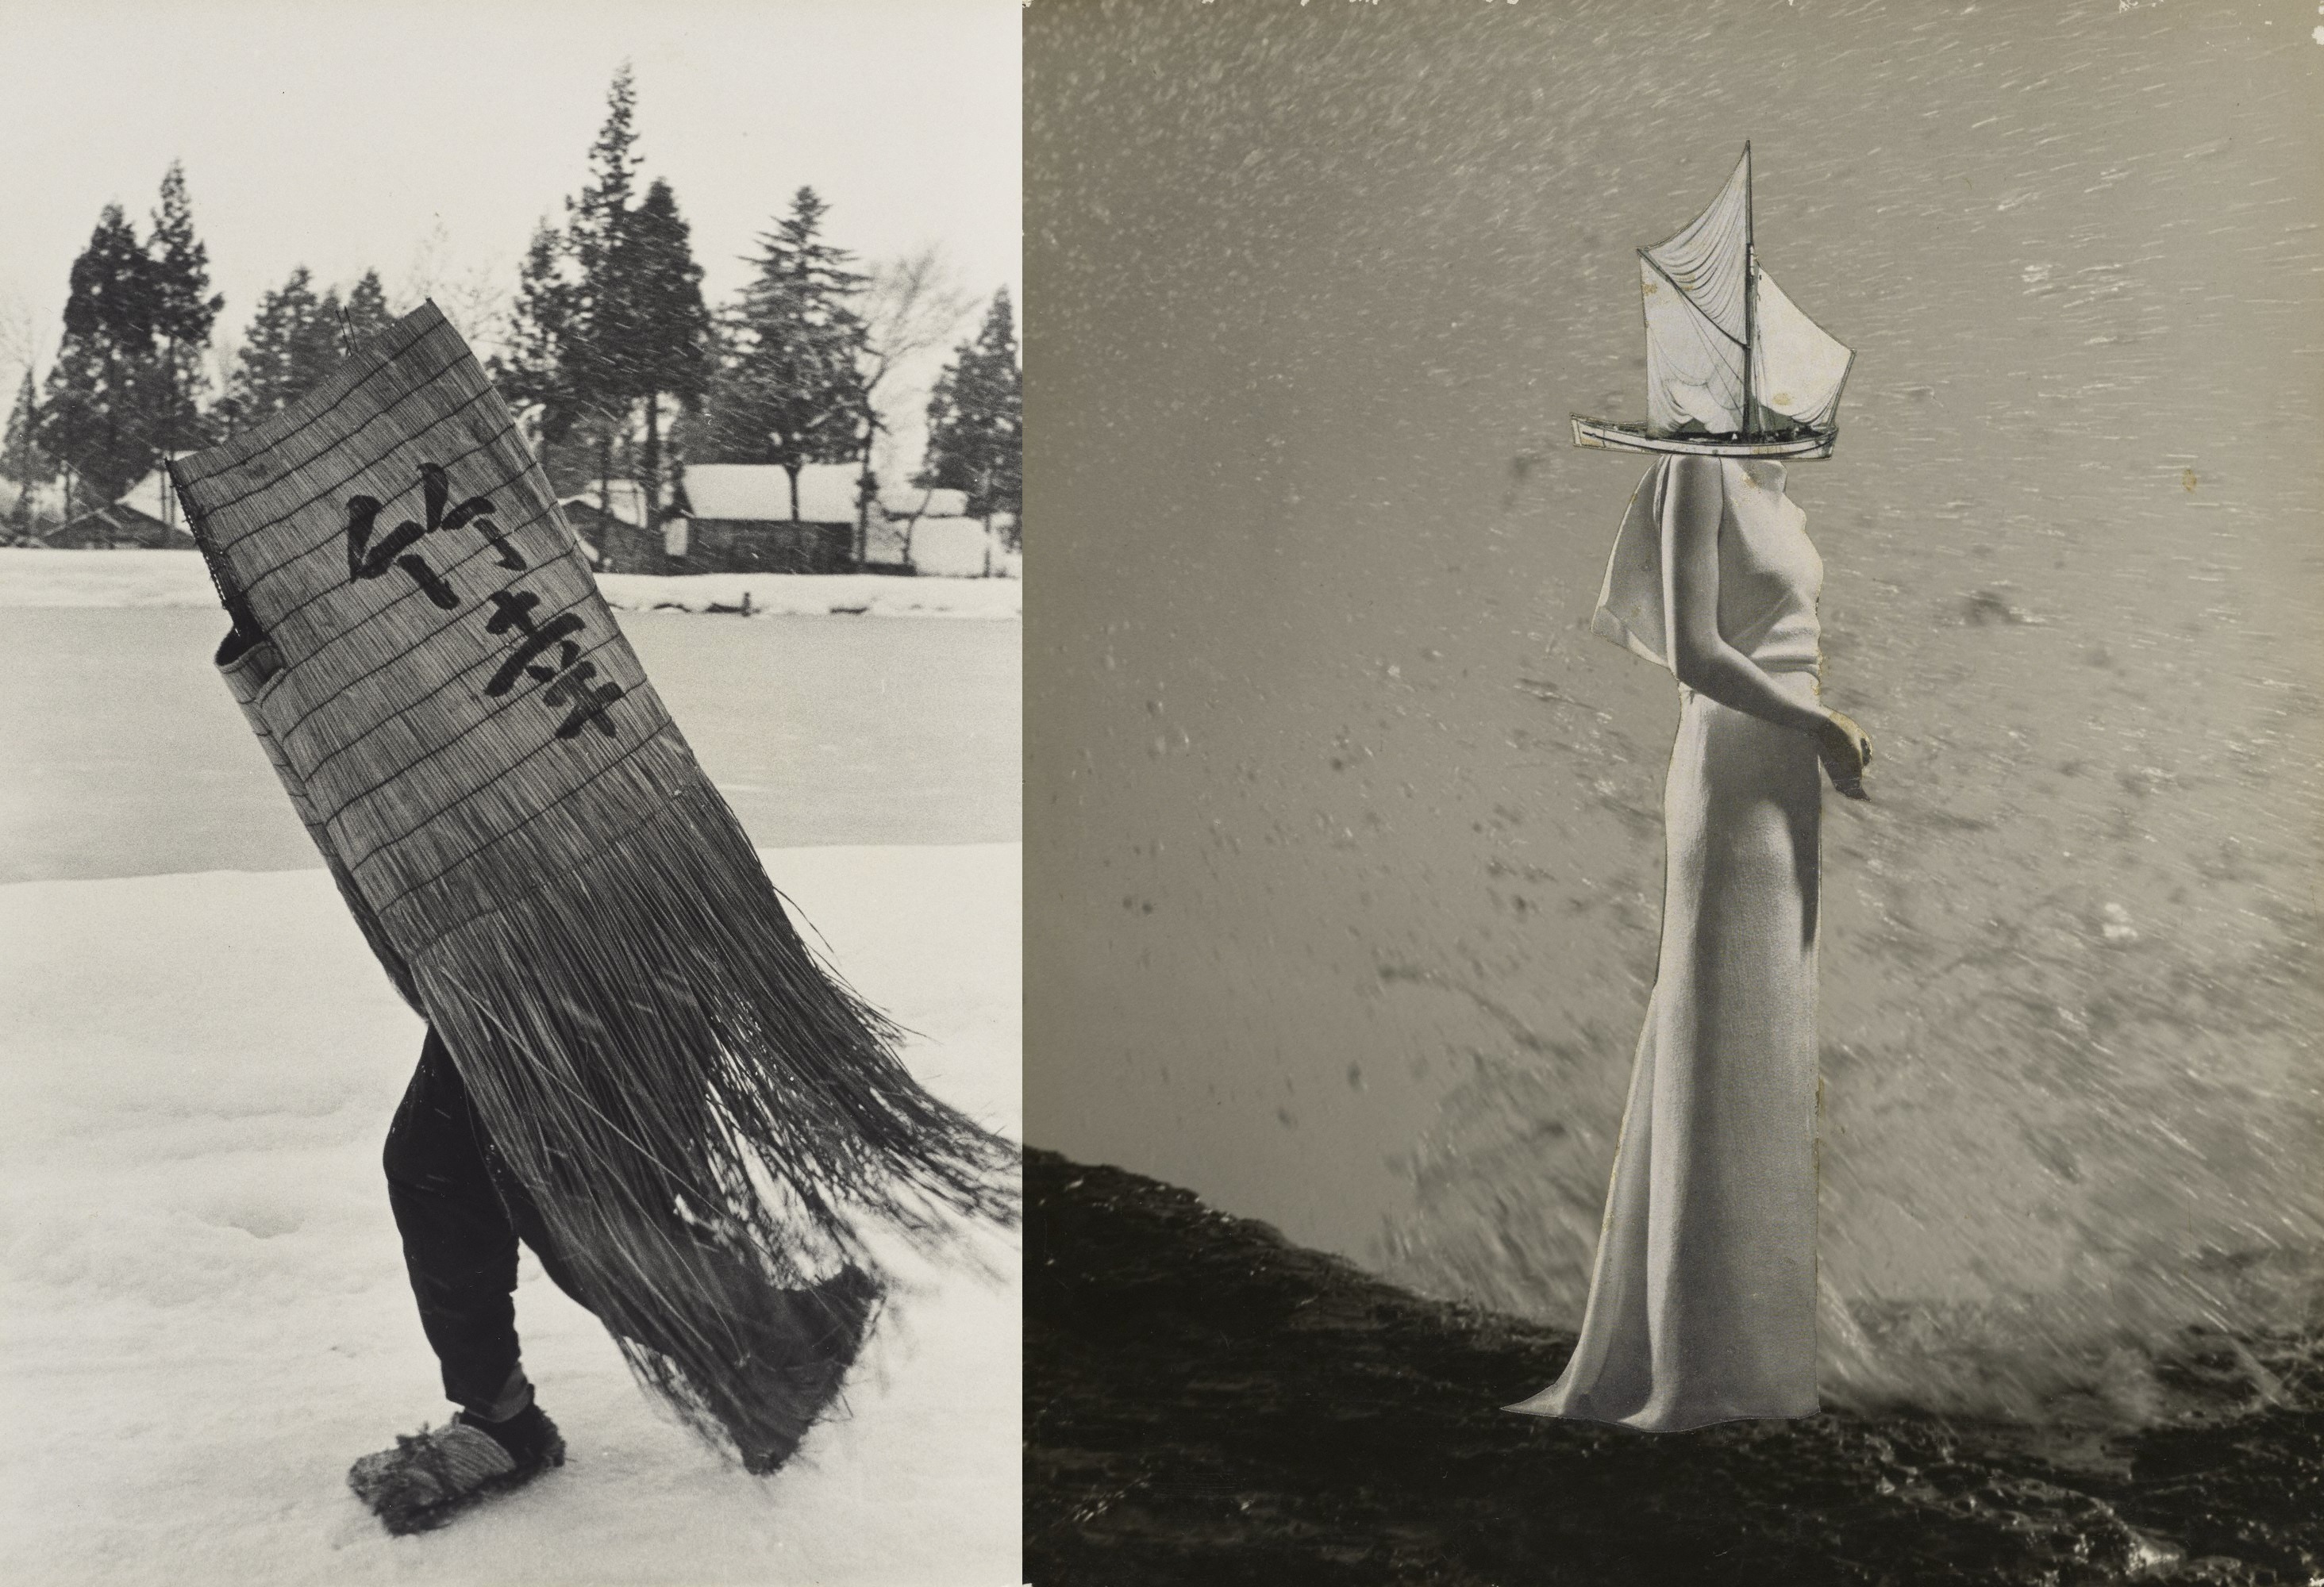 (Left: “Man in a Traditional Minoboshi Raincoat, Niigata Prefecture” (1956) by Hiroshi Hamaya, gelatin silver print, © Keisuke Katano The J. Paul Getty Museum, Los Angeles/ Right: “A Chronicle of Drifting” (1949) by Kansuke Yamamoto, collage, © Toshio Yamamoto Private collection, entrusted to Tokyo Metropolitan Museum of Photography)